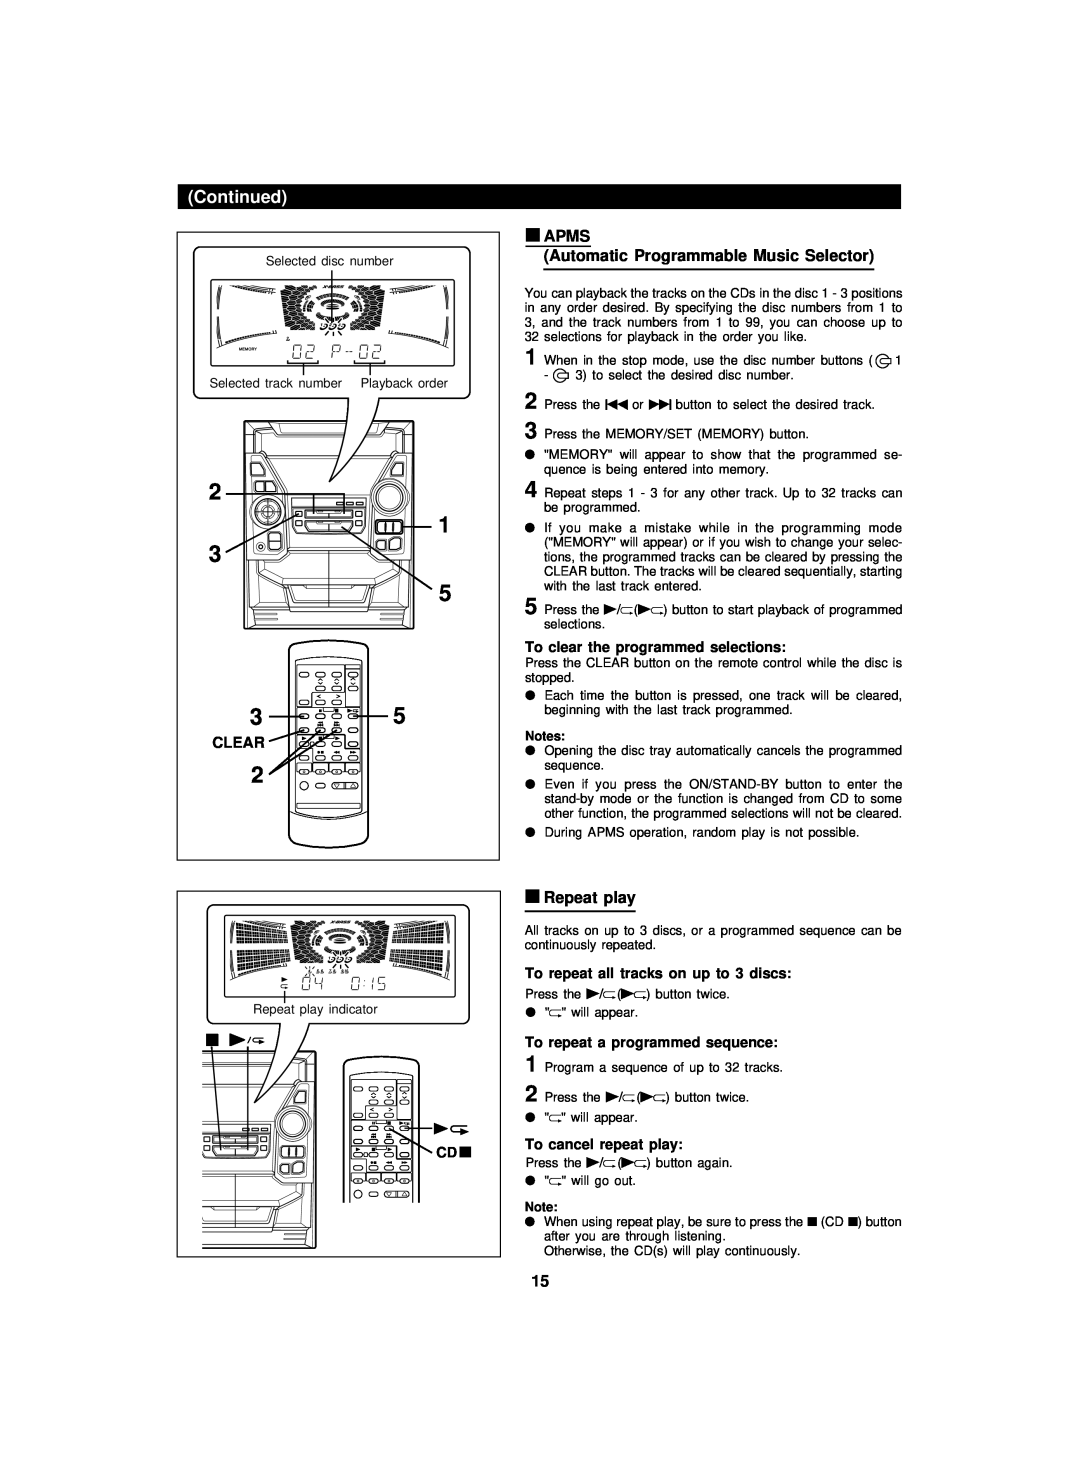 Sharp CD-PC3500 operation manual Continued, To clear the programmed selections, To repeat all tracks on up to 3 discs 